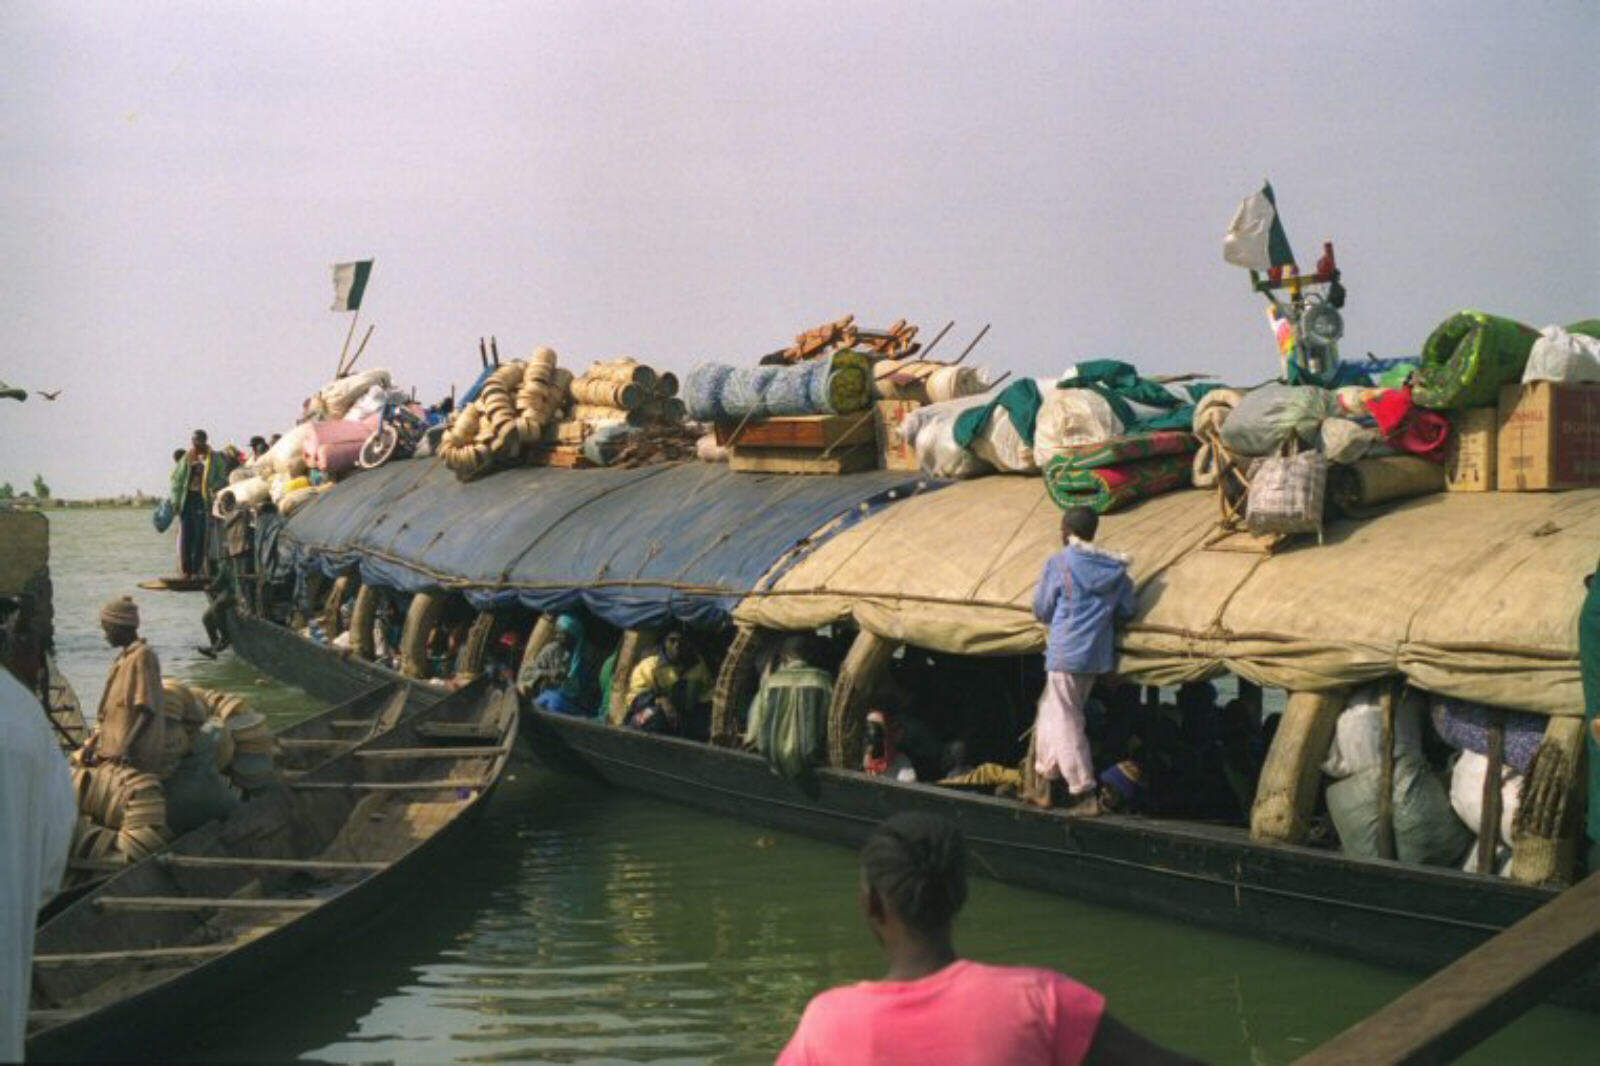 A Niger riverboat ready to depart, by Bar Bozo in Mopti